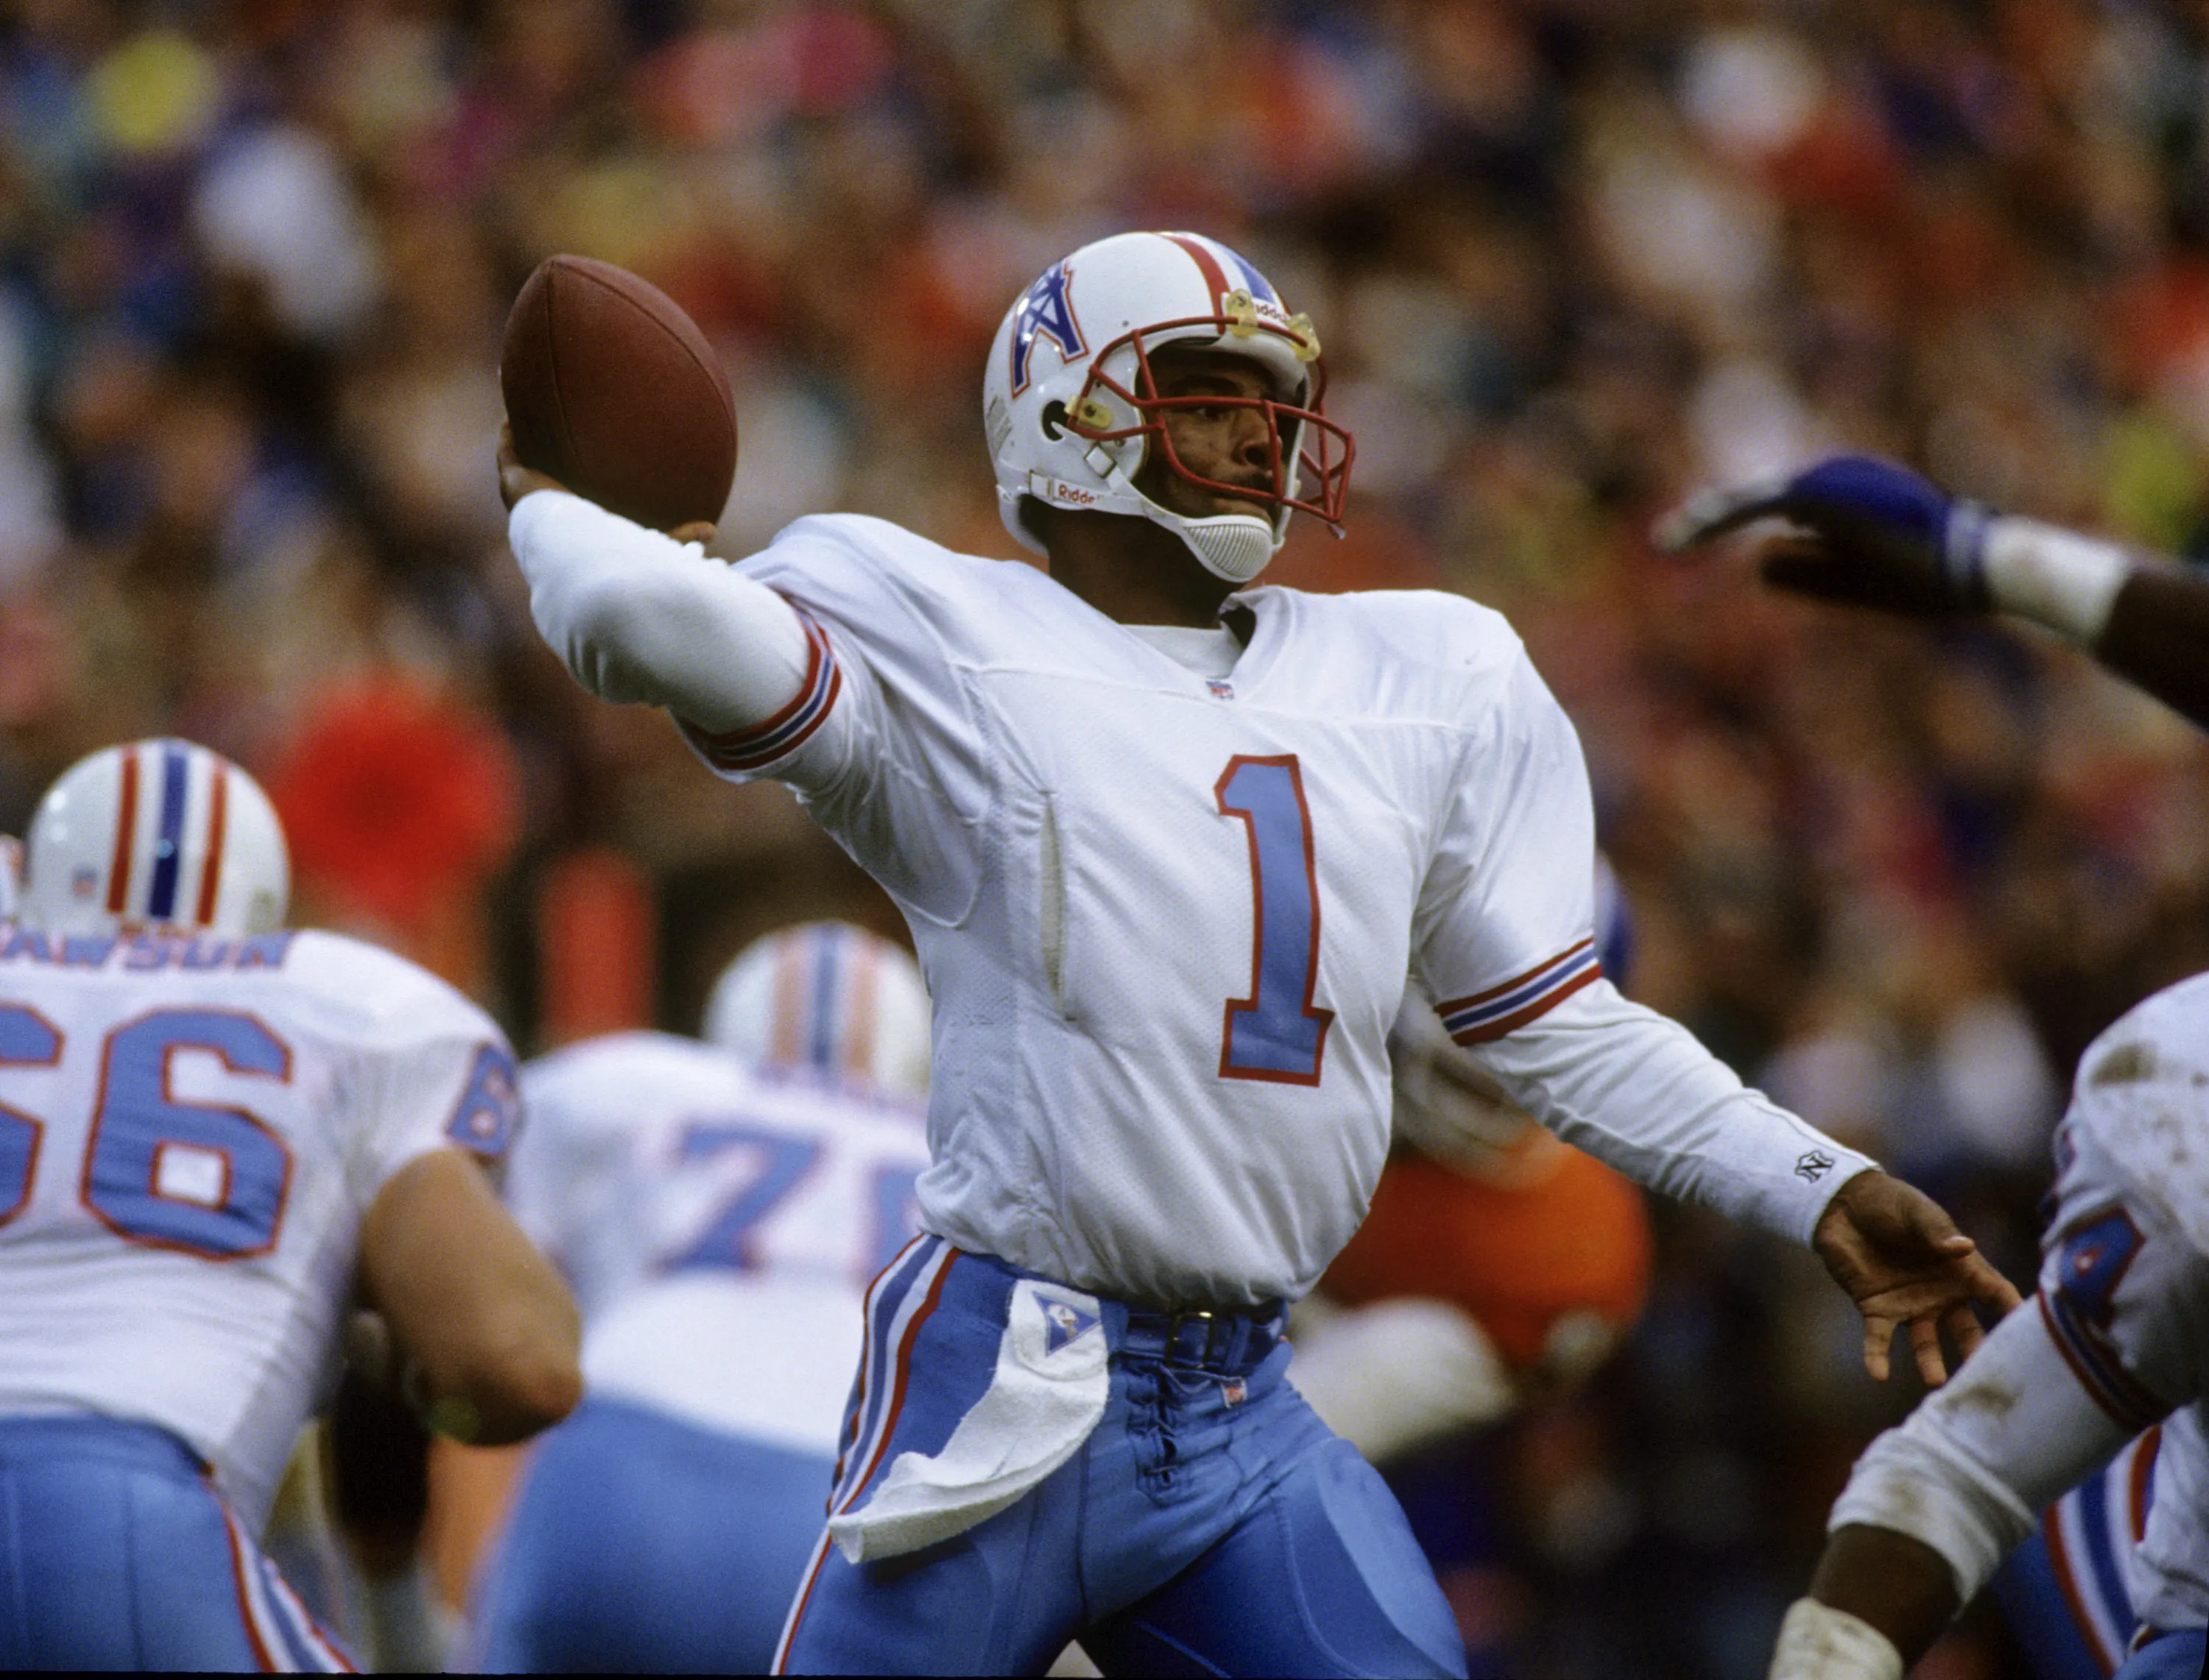 1991 AFC Divisional Playoff Game - Houston Oilers vs Denver Broncos - January 4, 1992